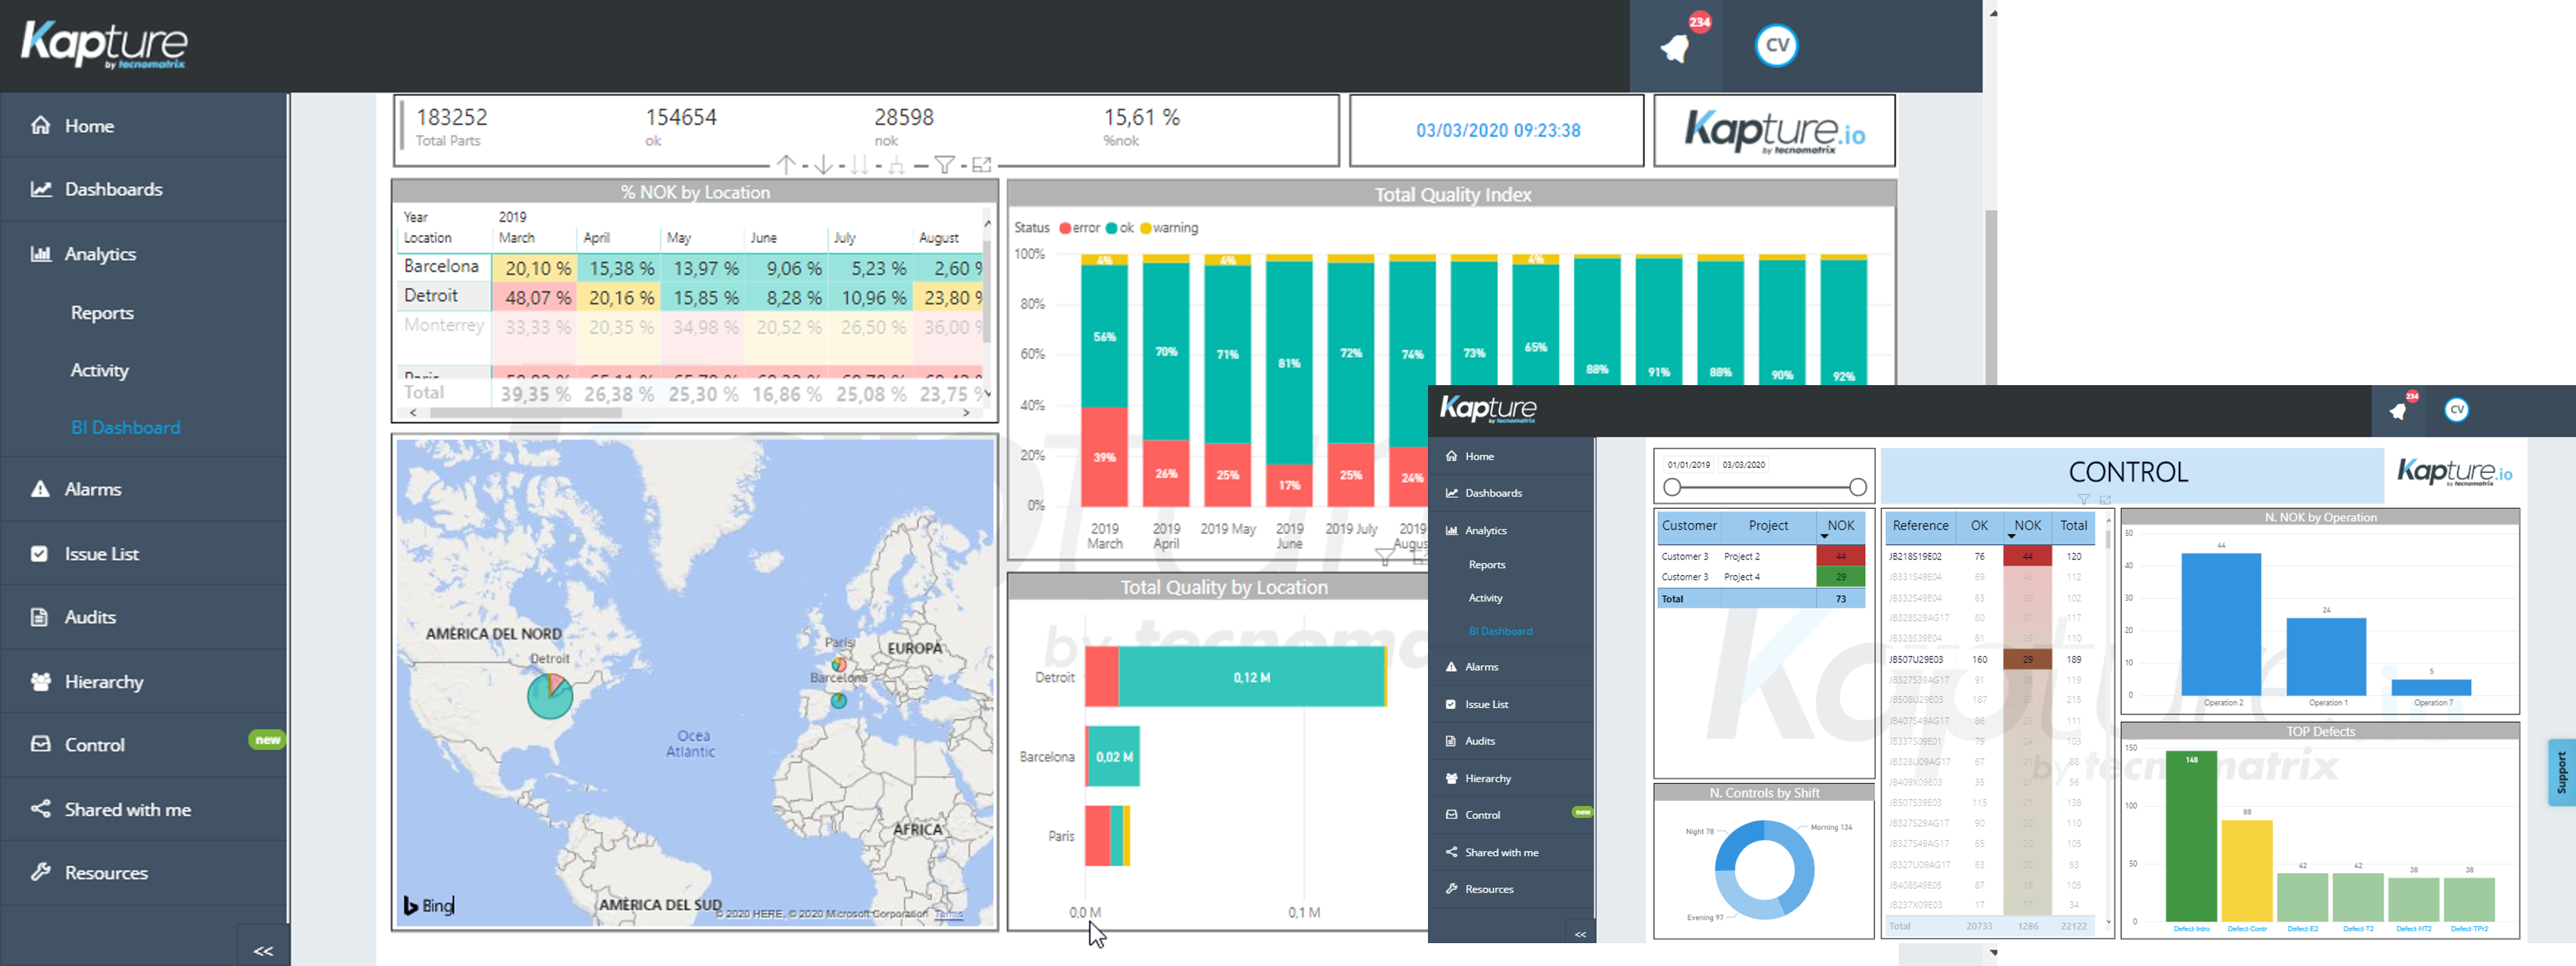 Visual management. Customized KPIs and data aggregation in real-time. Dynamic reporting. Easy to spot issues and hidden costs.